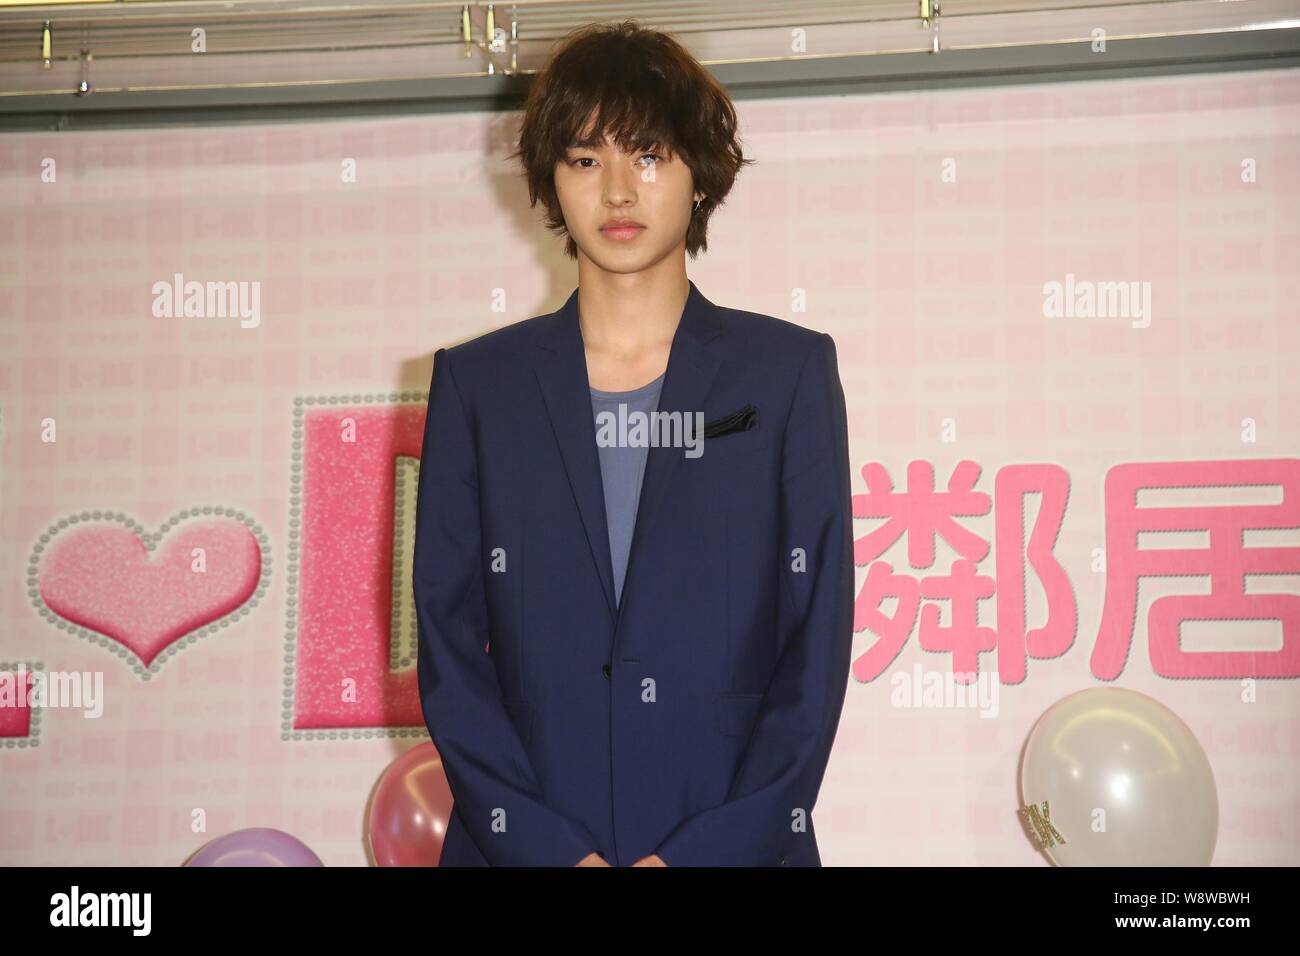 Japanese actor Kento Yamazaki poses during a press conference for his new movie, L-DK, in Taipei, Taiwan, 3 April 2014. Stock Photo